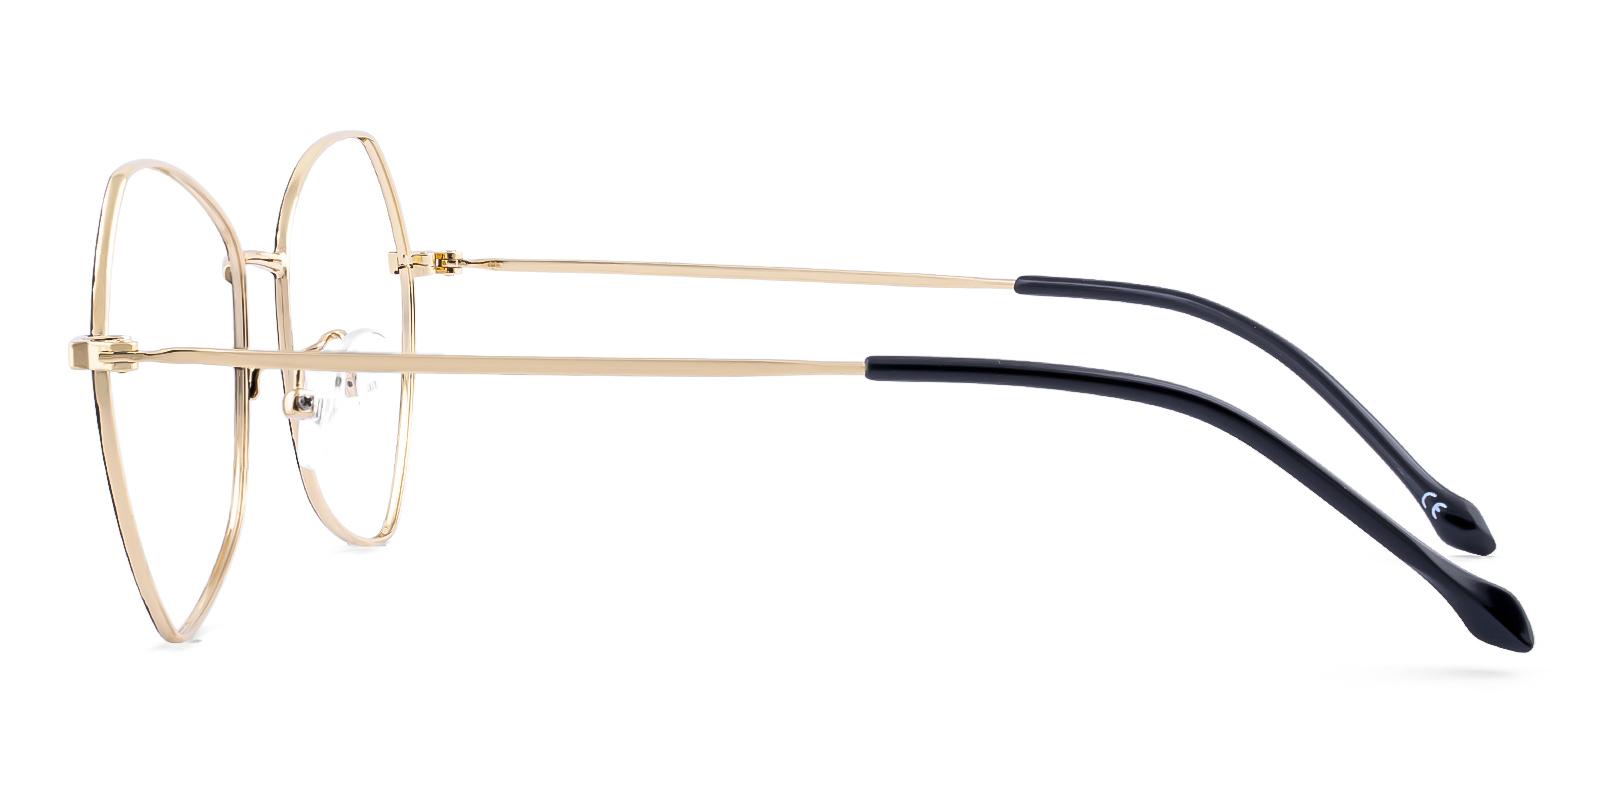 Thellet Gold Metal Eyeglasses , NosePads Frames from ABBE Glasses